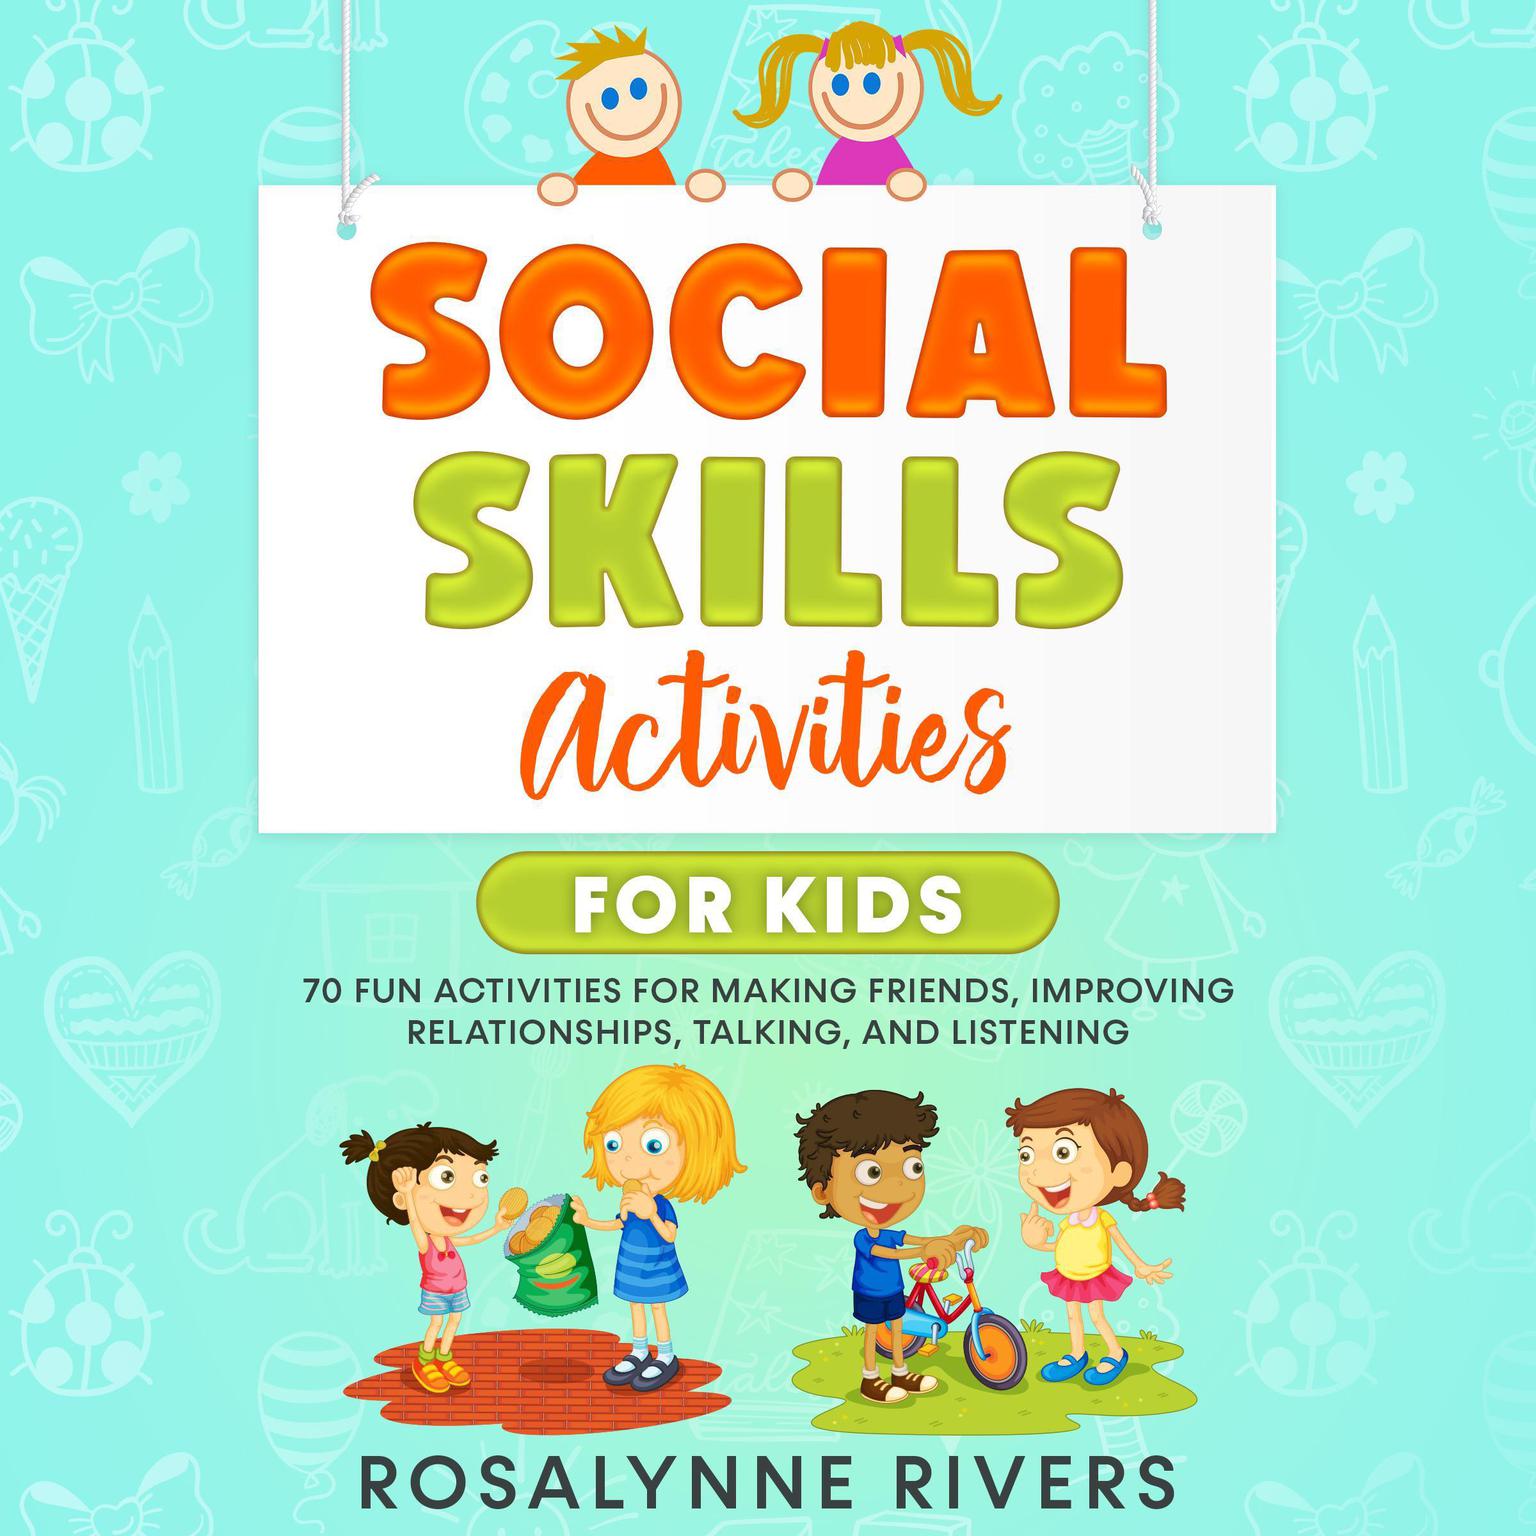 Social Skills Activities for Kids (70 Fun Activities for Making Friends, Improving Relationships, Talking, and Listening): 70 Fun Activities for Making Friends, Improving Relationships, Talking, and Listening Audiobook, by Rosalynne Rivers